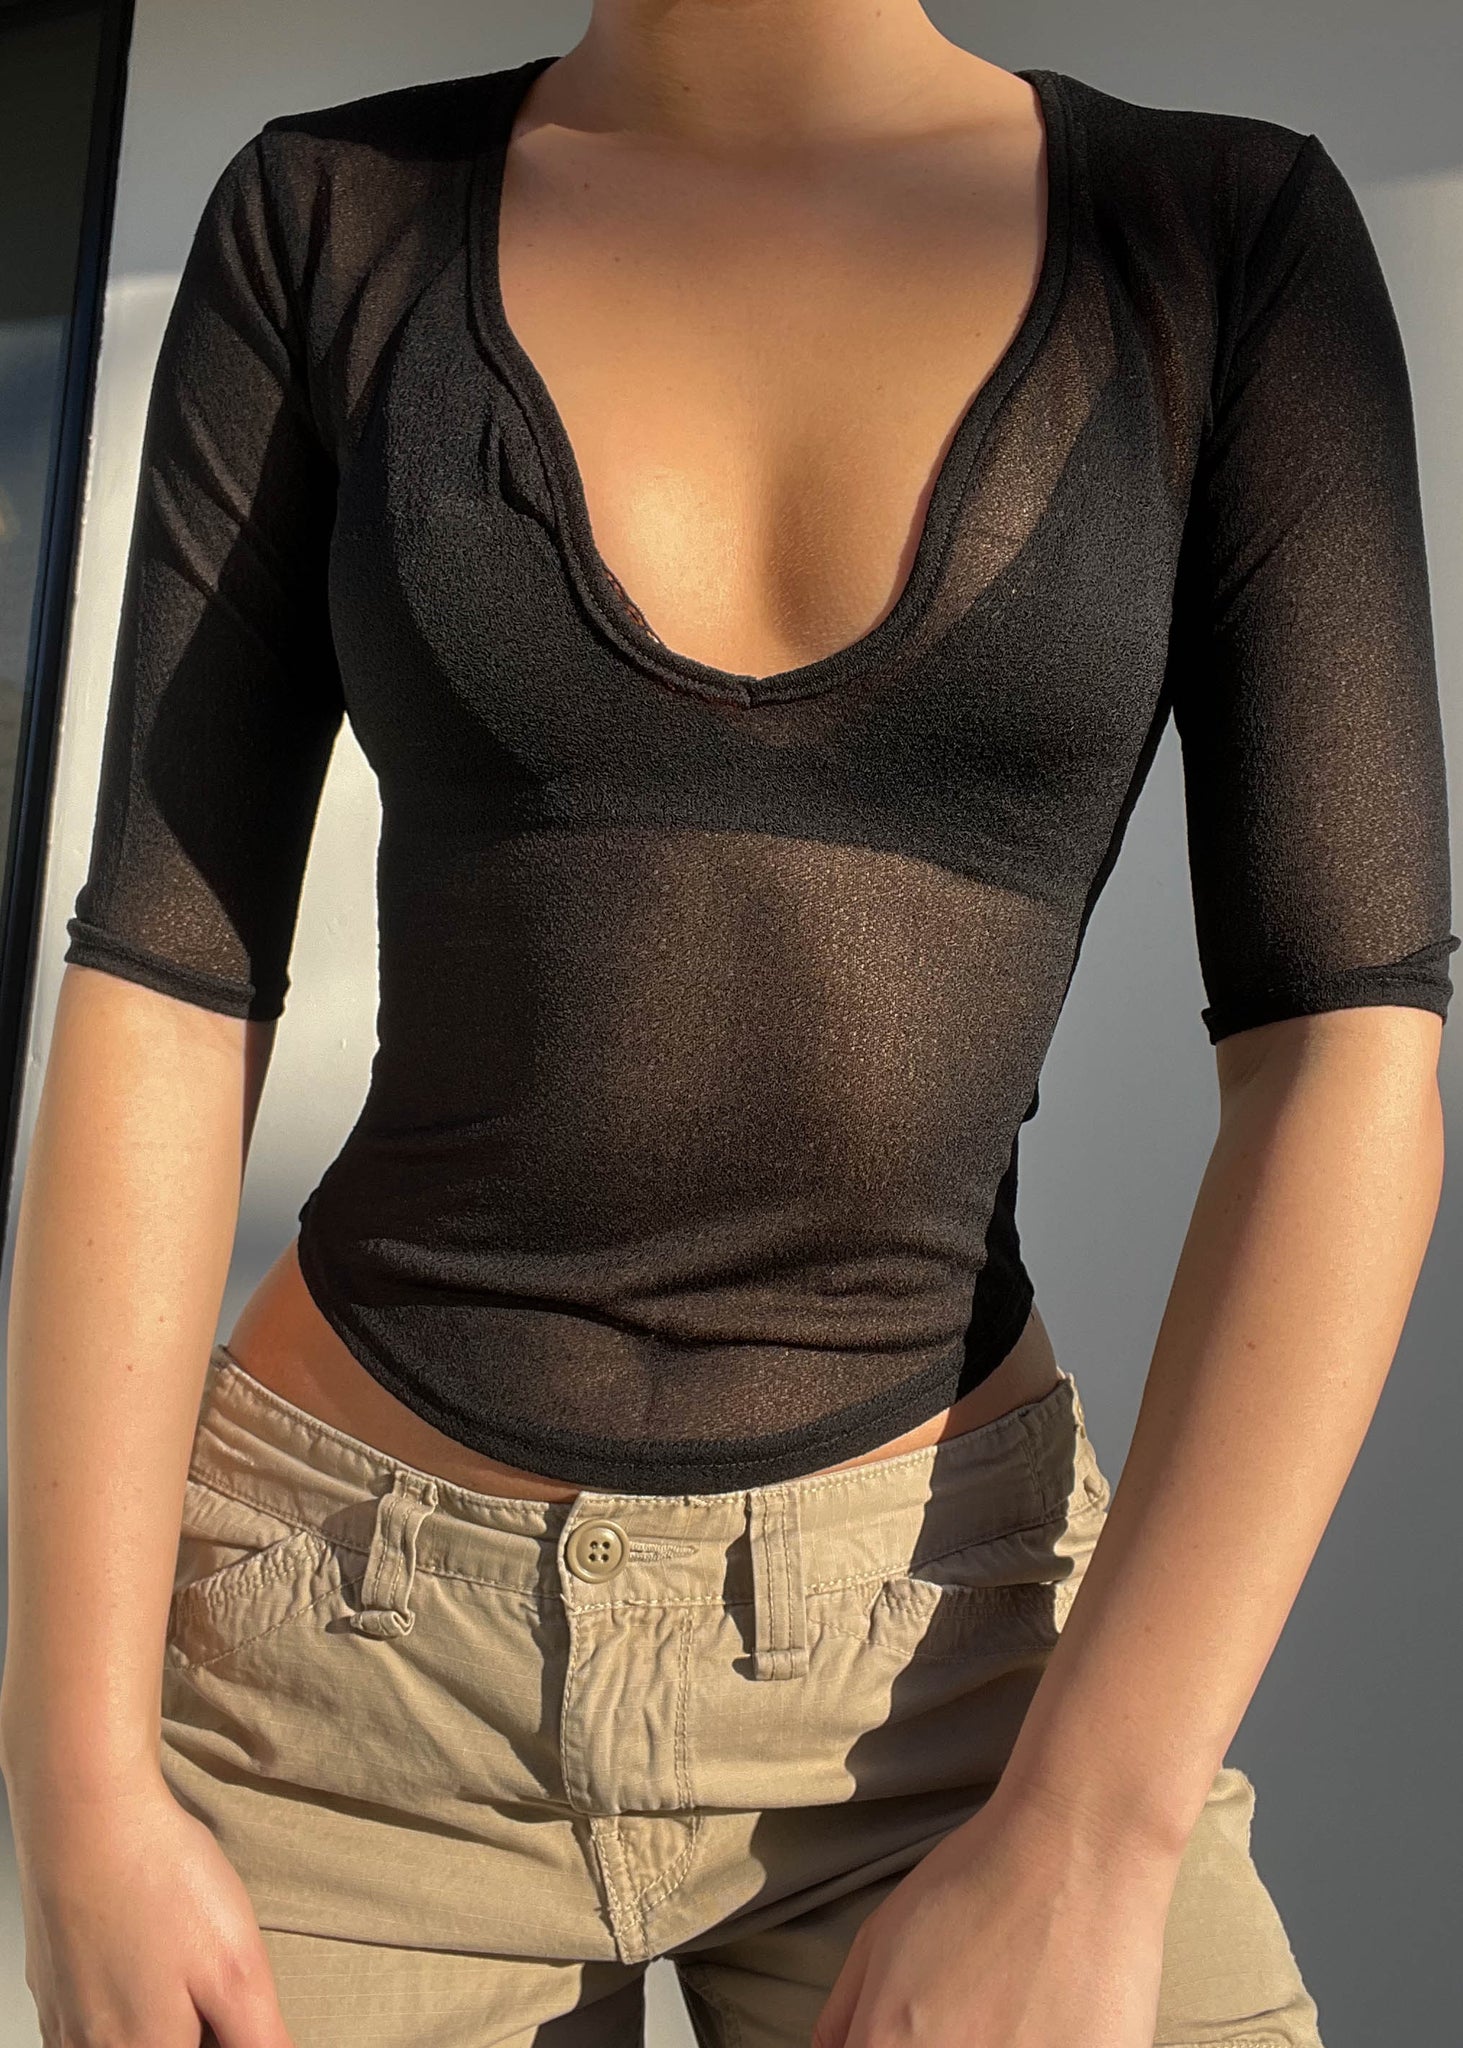 90's Mesh Fitted Black Top (S)